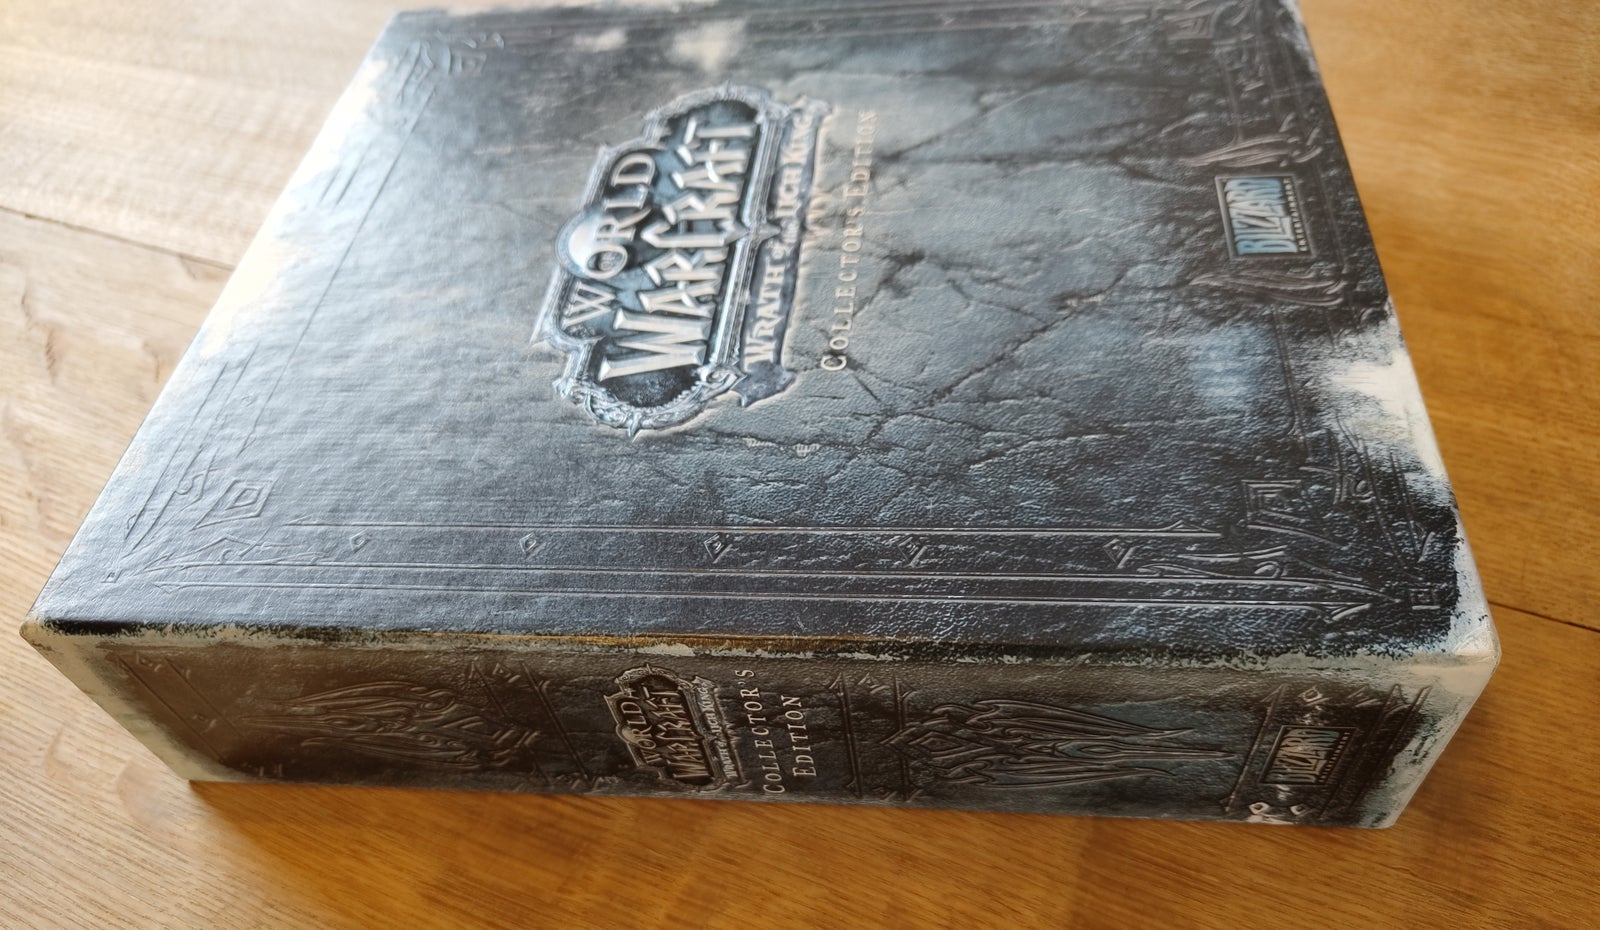 WoW Wrath of the Lich King Collector's edition, til pc,